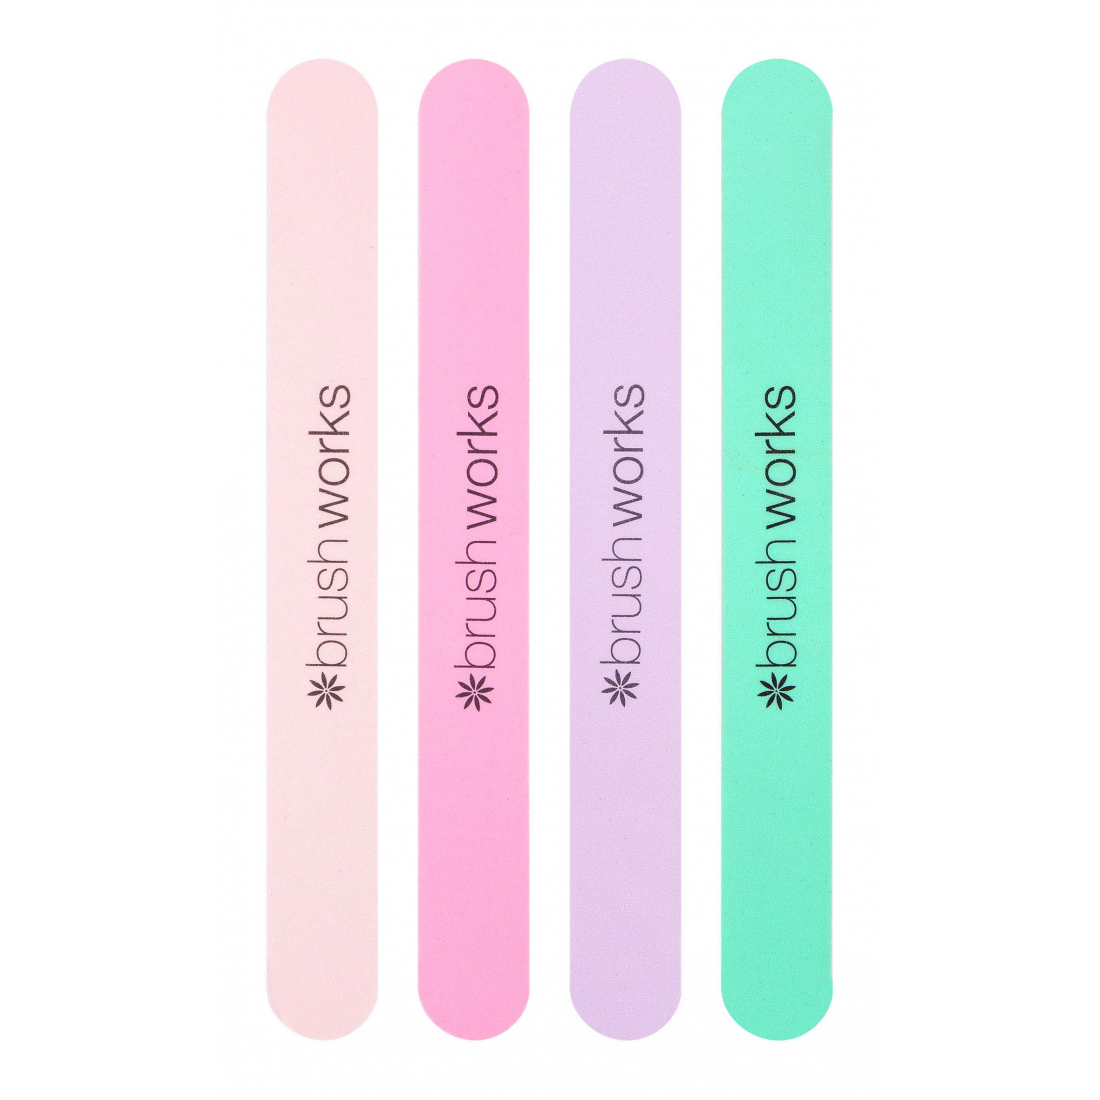 'Pastel Coloured' Nail File - 4 Pieces